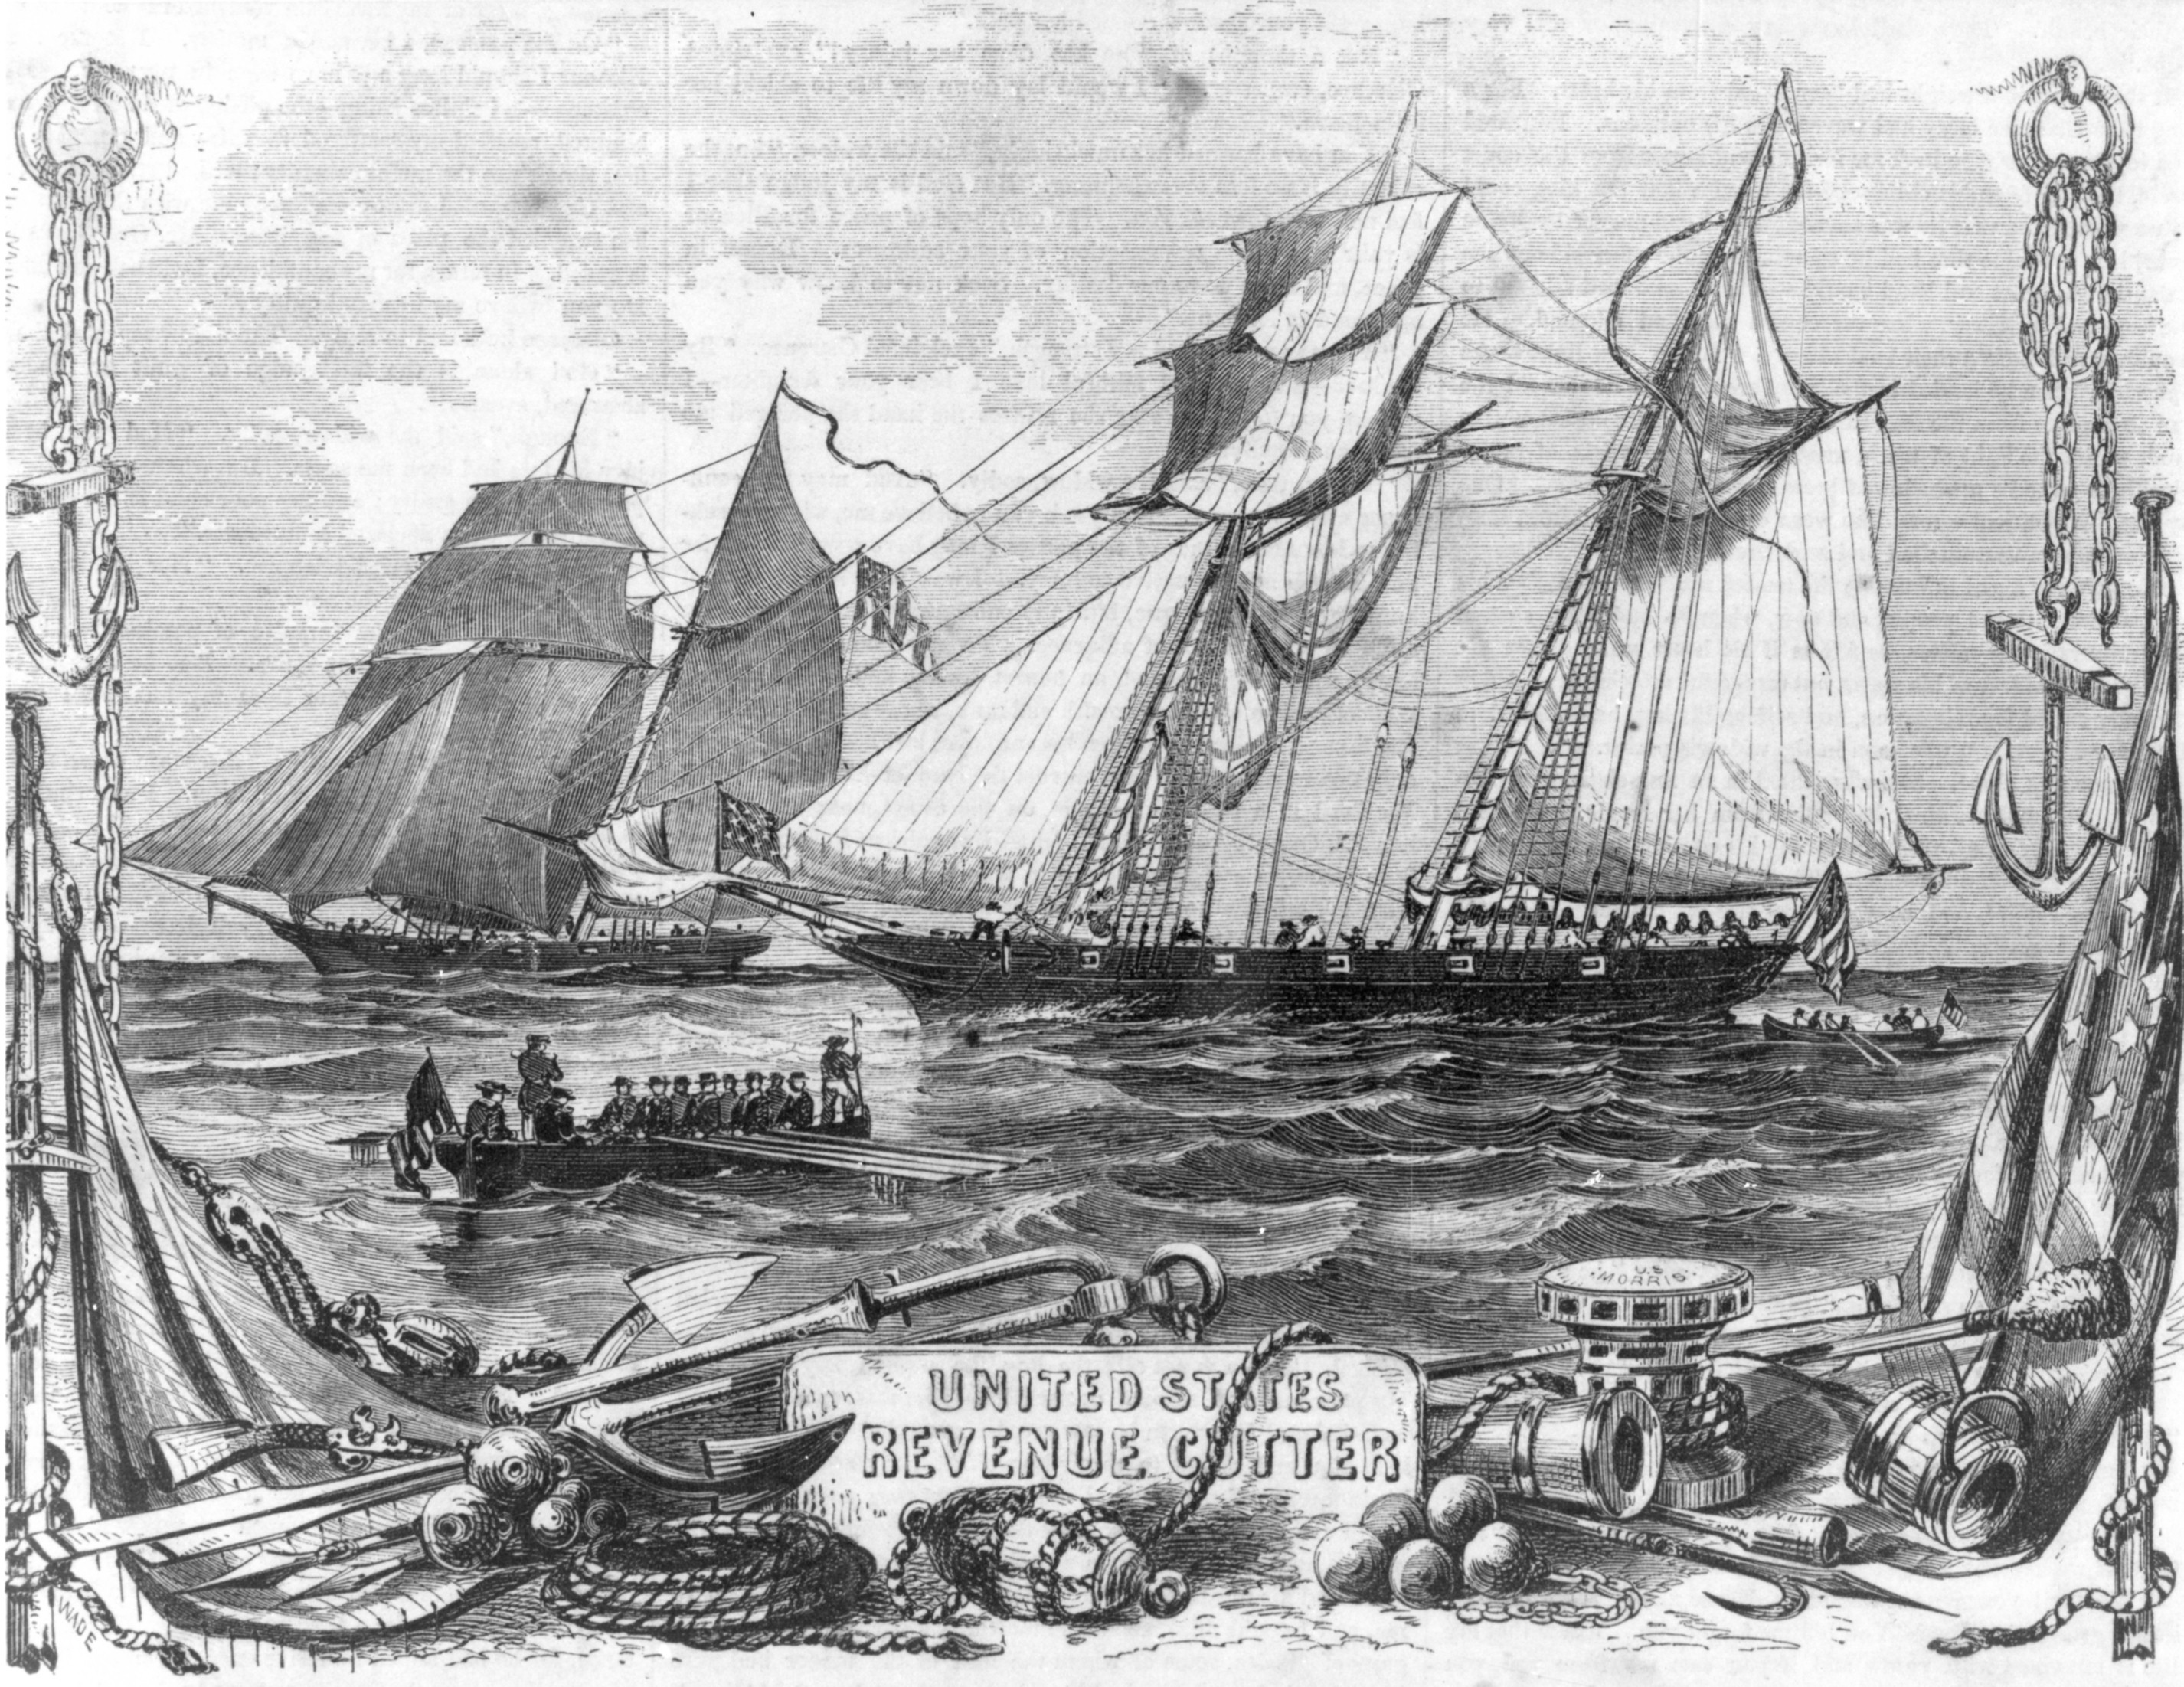 Engraving showing the Revenue Cutter Morris before her loss in the 1846 hurricane. (Source of engraving unknown)